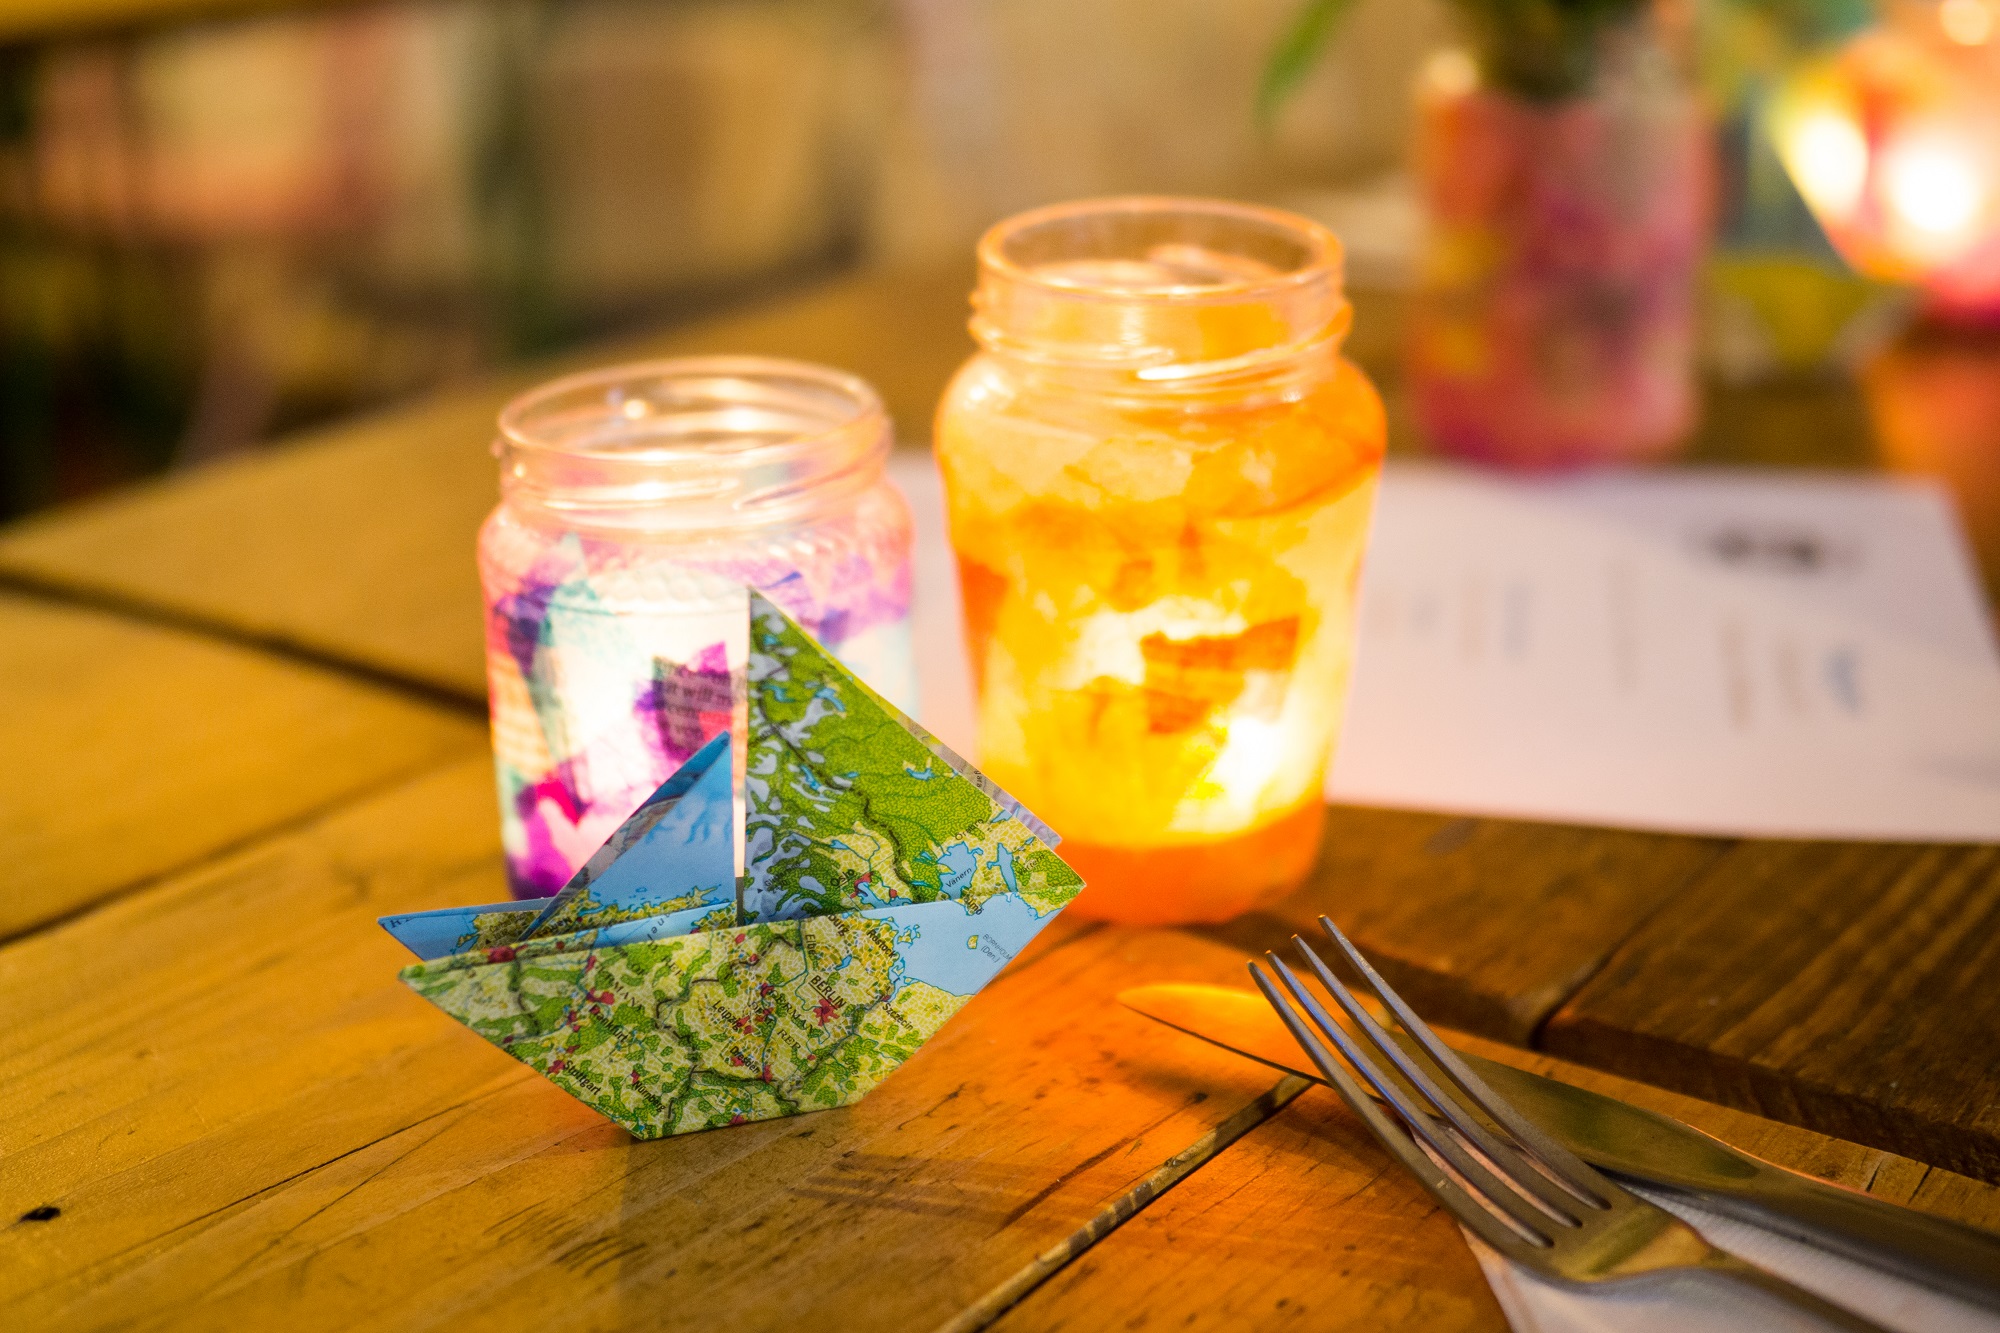 A table lit with candles, with a paper origami ship.